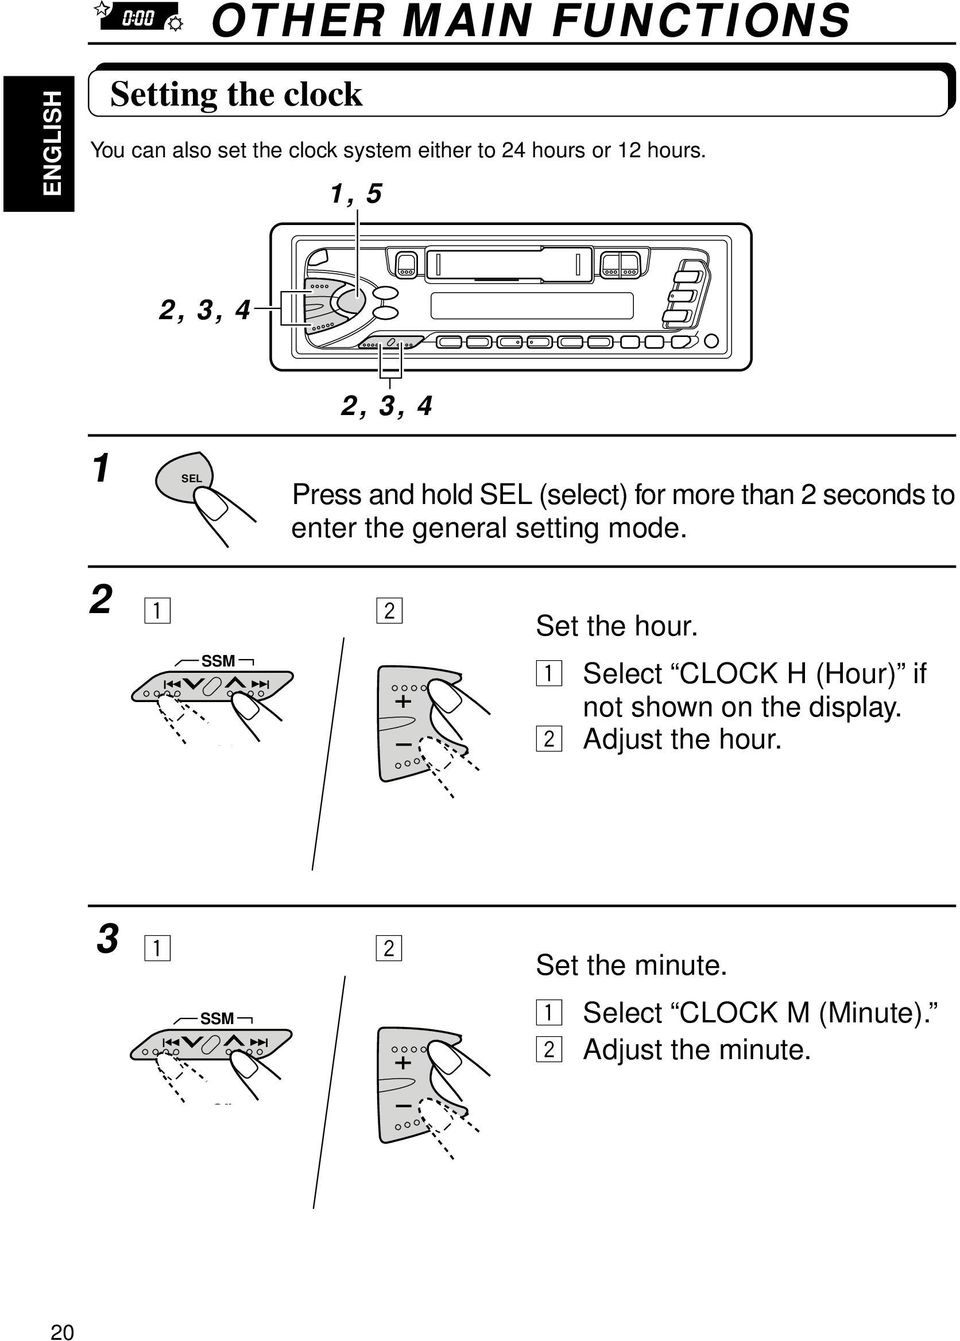 , 5, 3, 4 SEL, 3, 4 Press and hold SEL (select) for more than seconds to enter the general